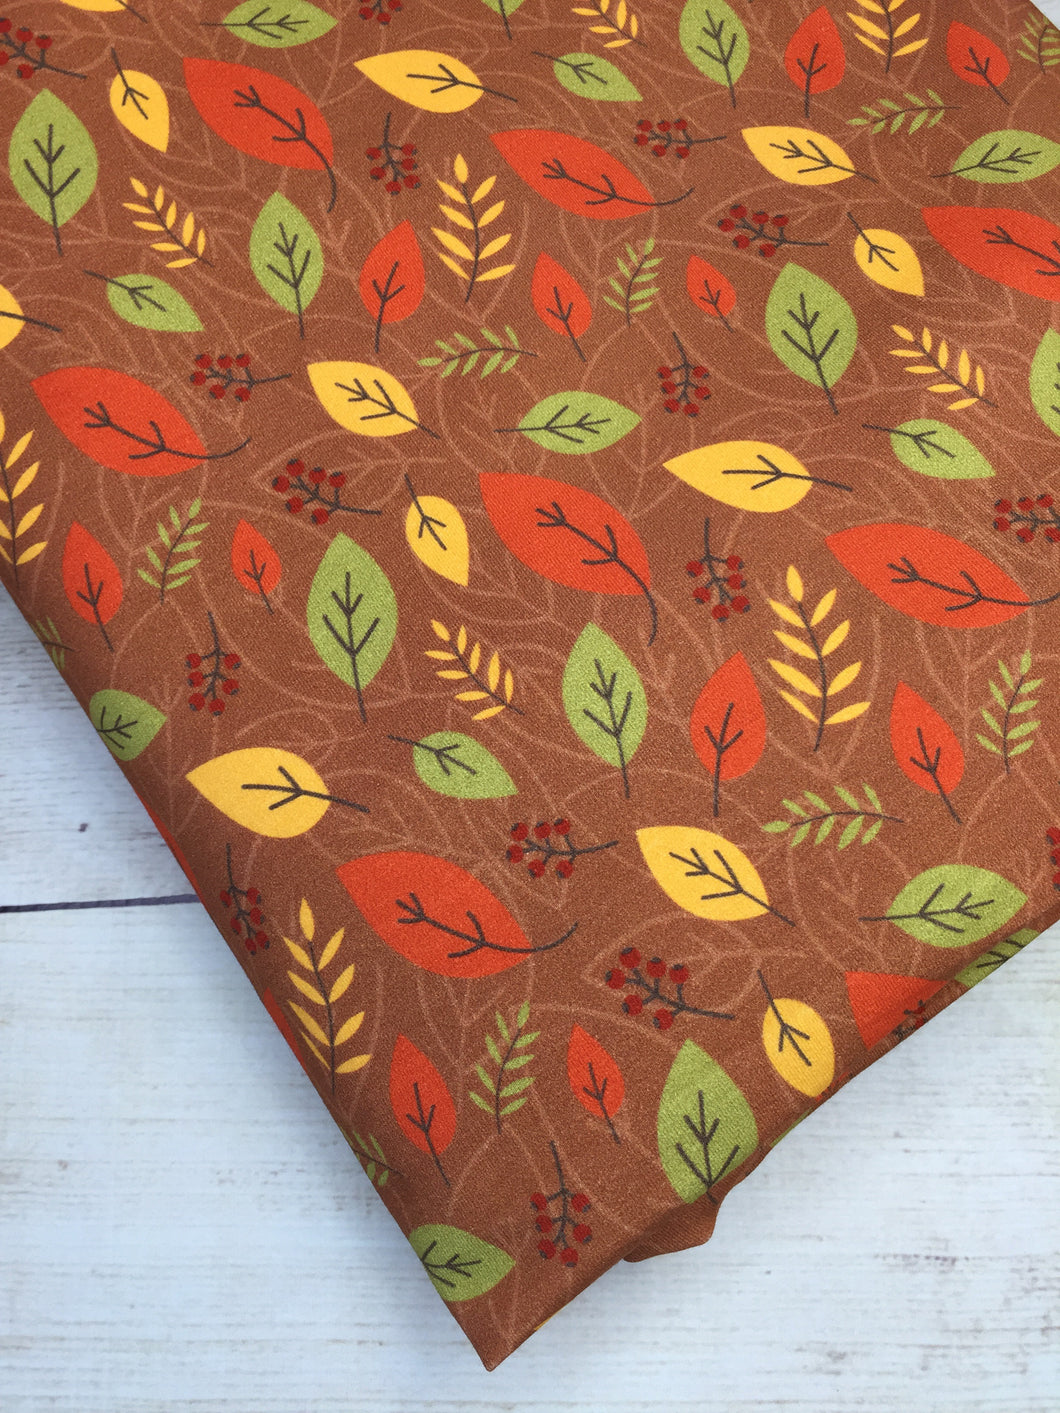 Clearance Cotton Spandex Autumn Leaves